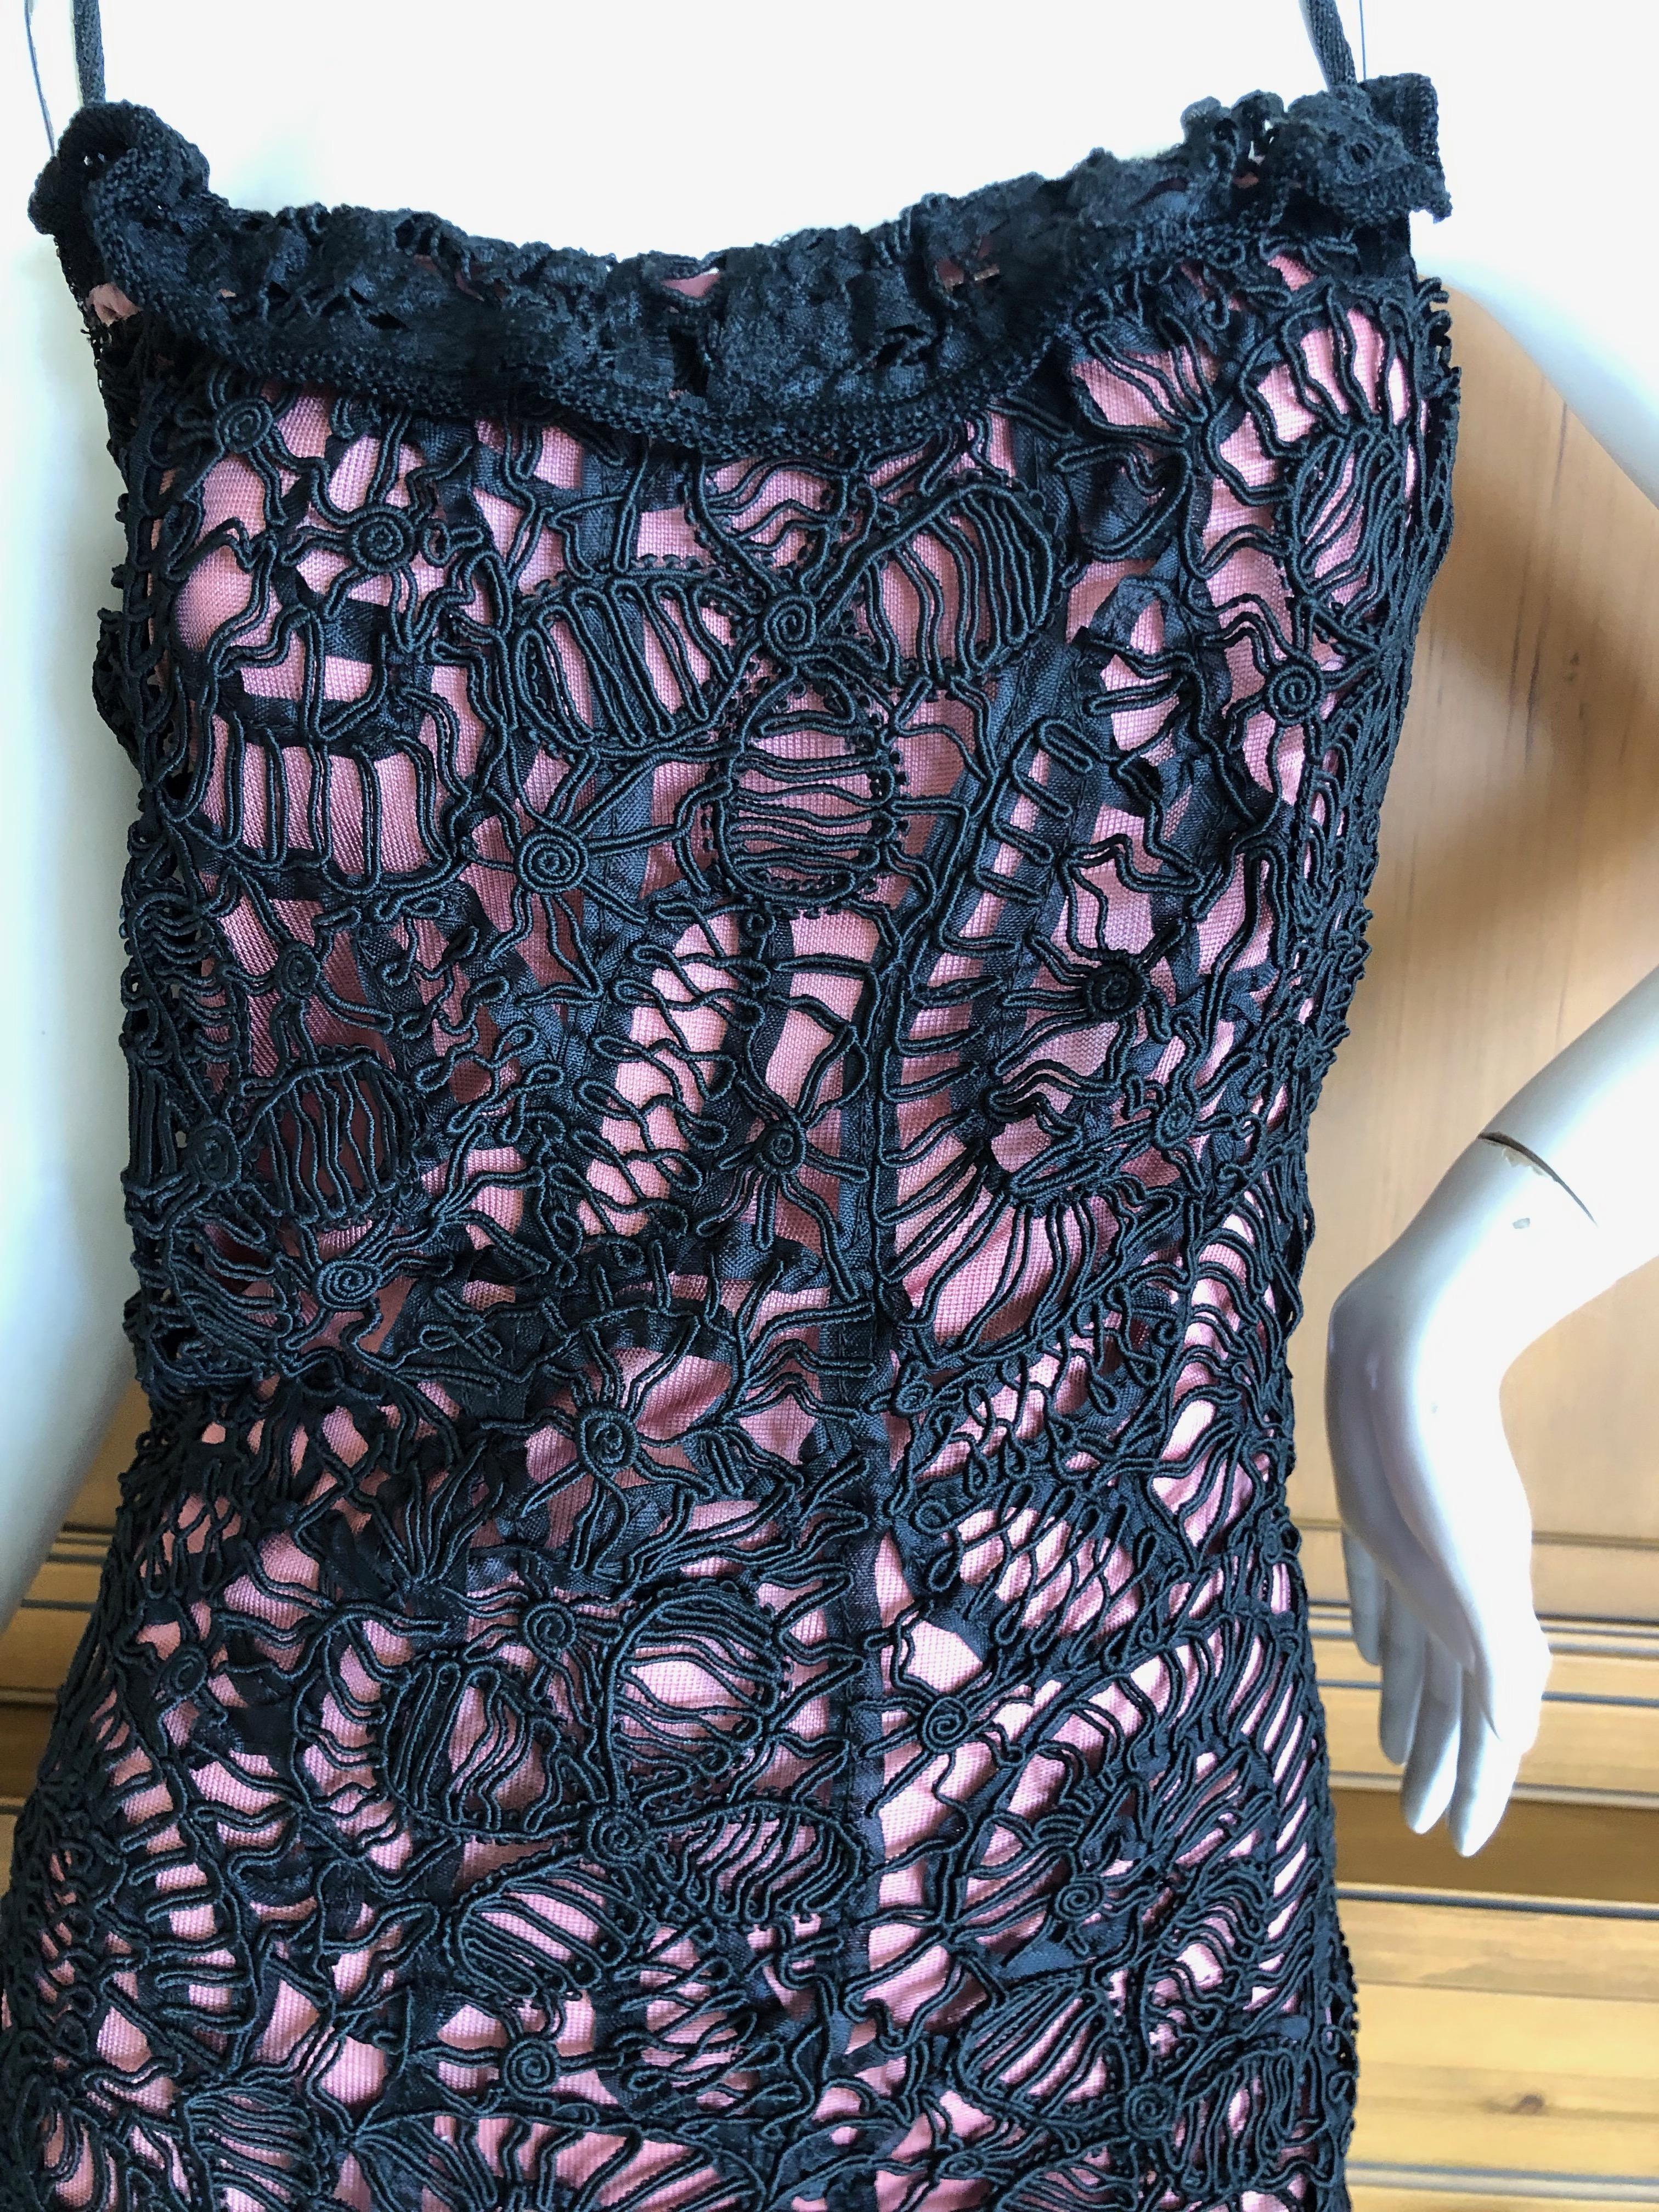 John Galliano Unusual 1990's Black Lace over Pale Pink Overlay Cocktail Dress For Sale 3